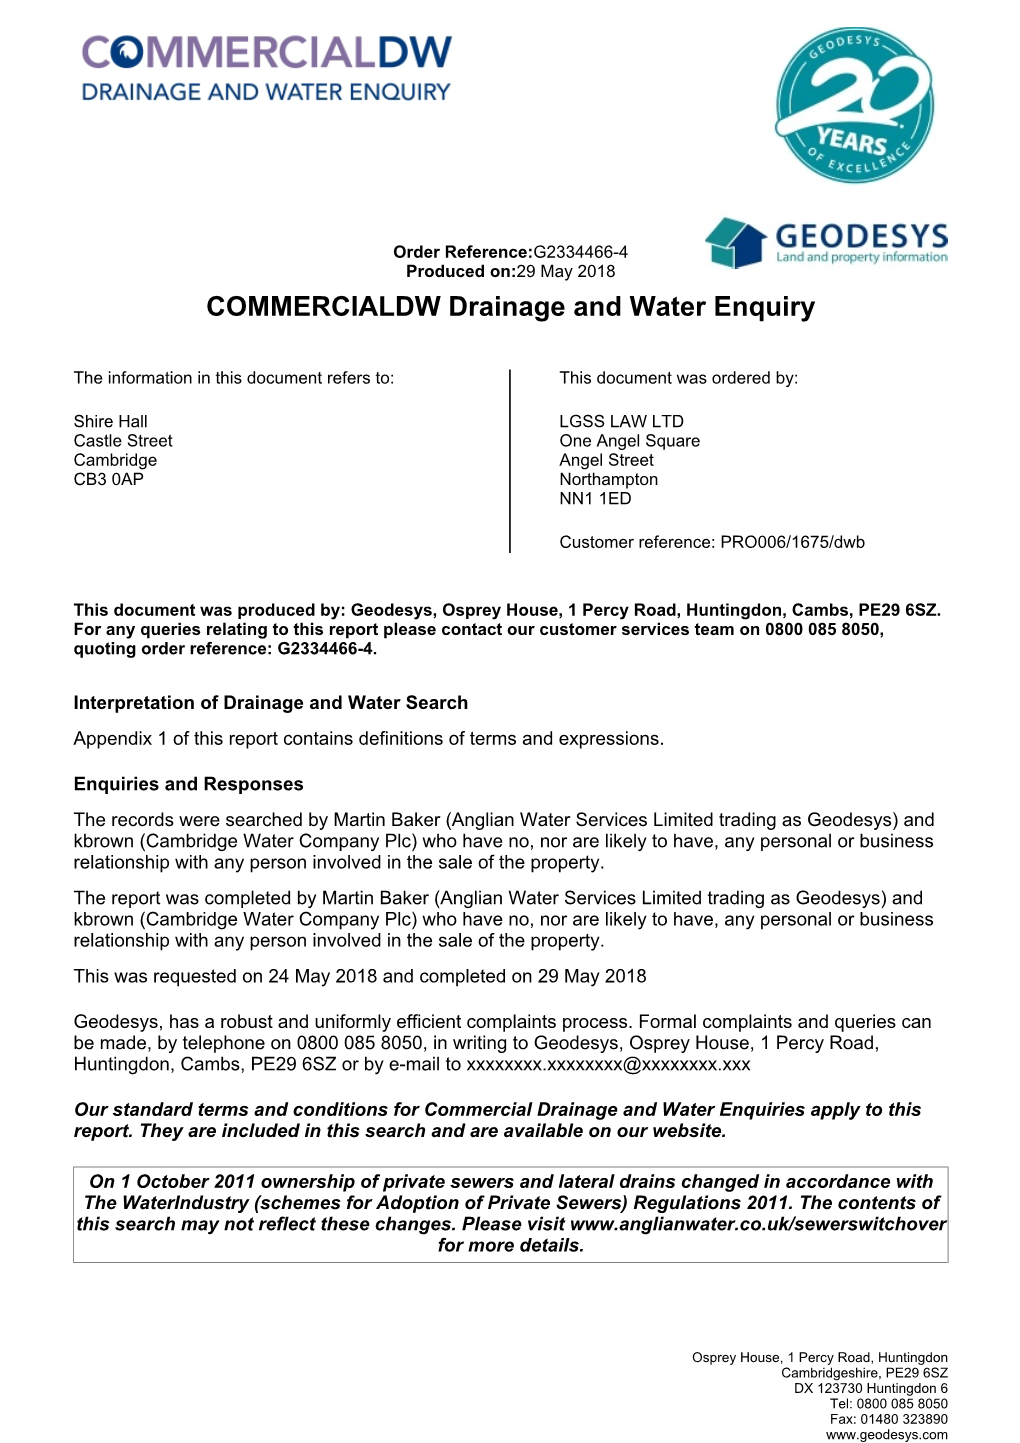 COMMERCIALDW Drainage and Water Enquiry